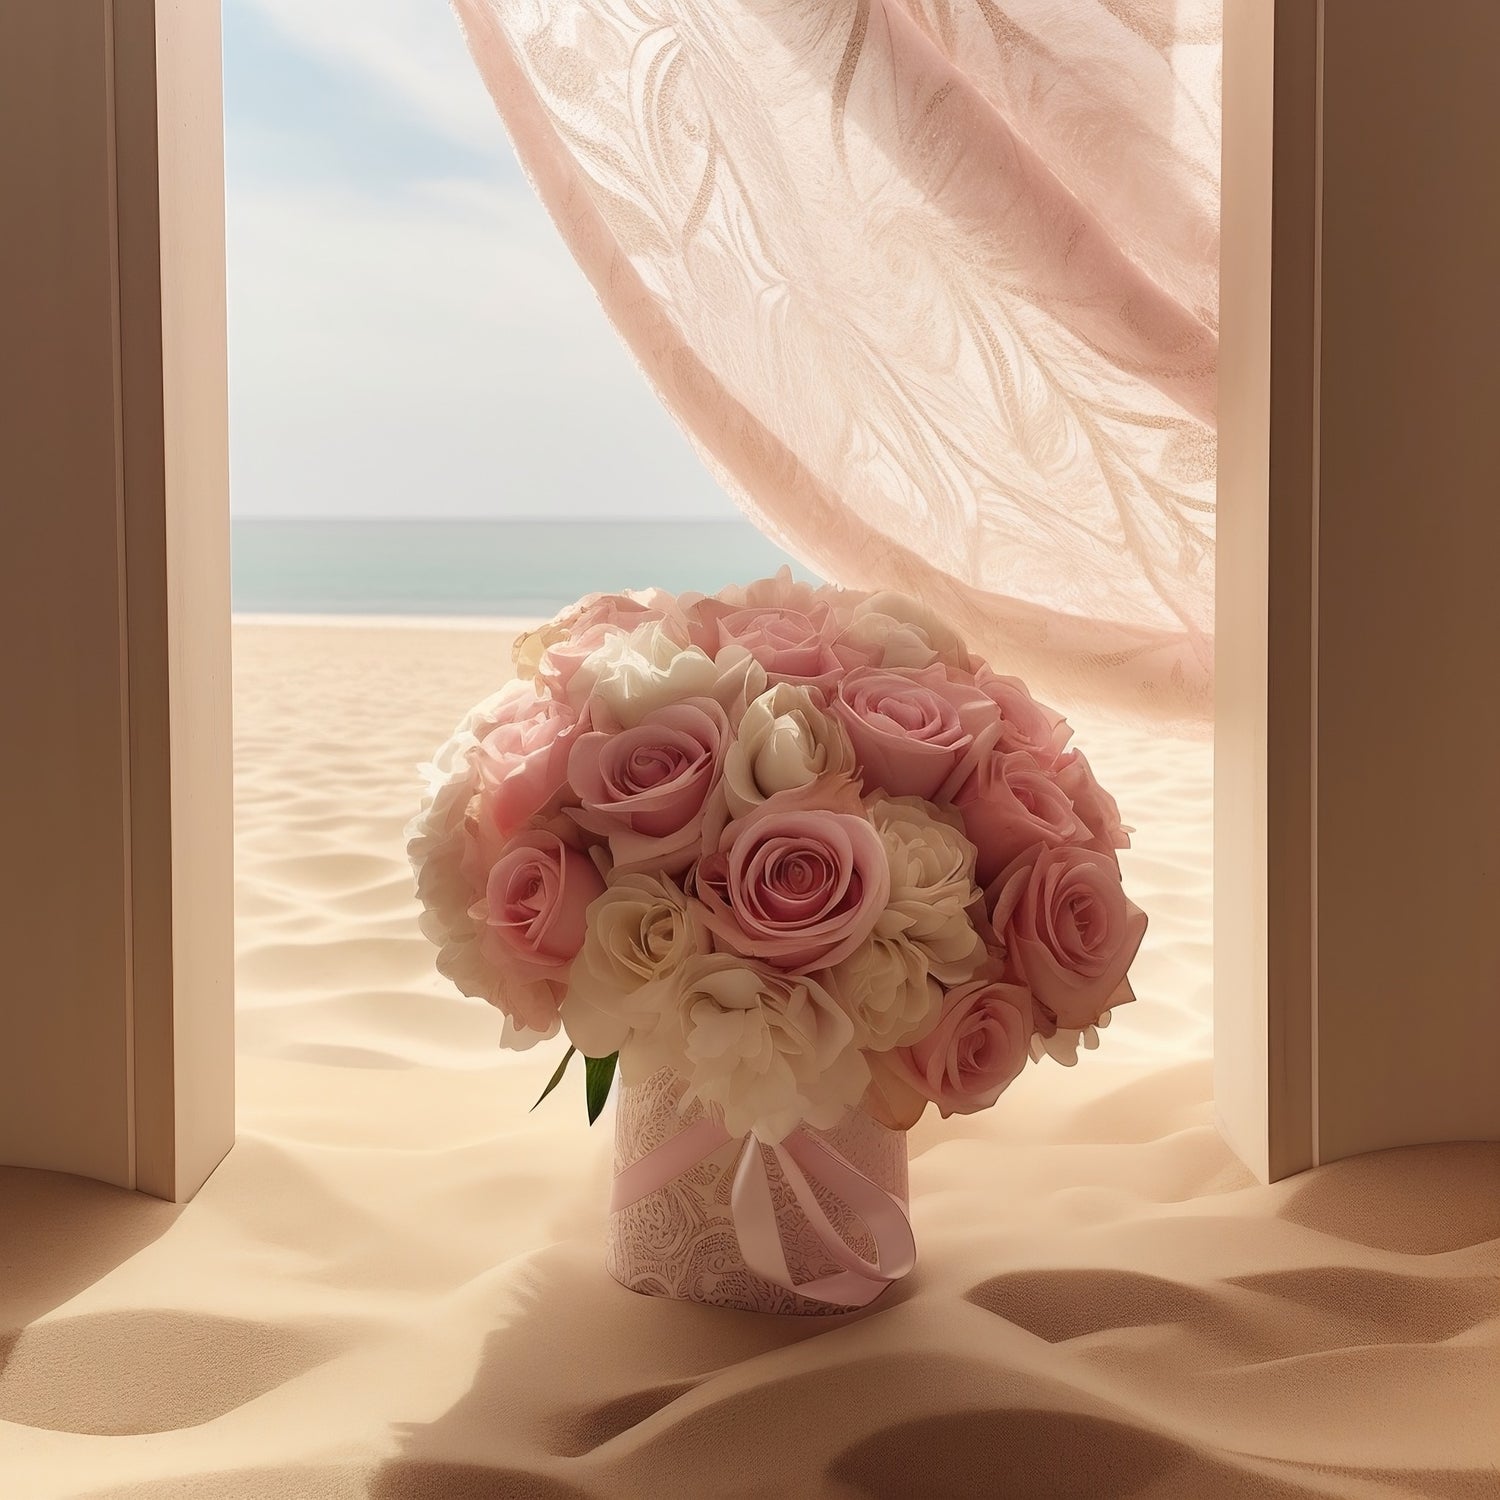 Beautiful pink floral arrangement with roses, a pink embroidered box, and a flowing pink curtain in the background overlooking a beach with the ocean in the background.